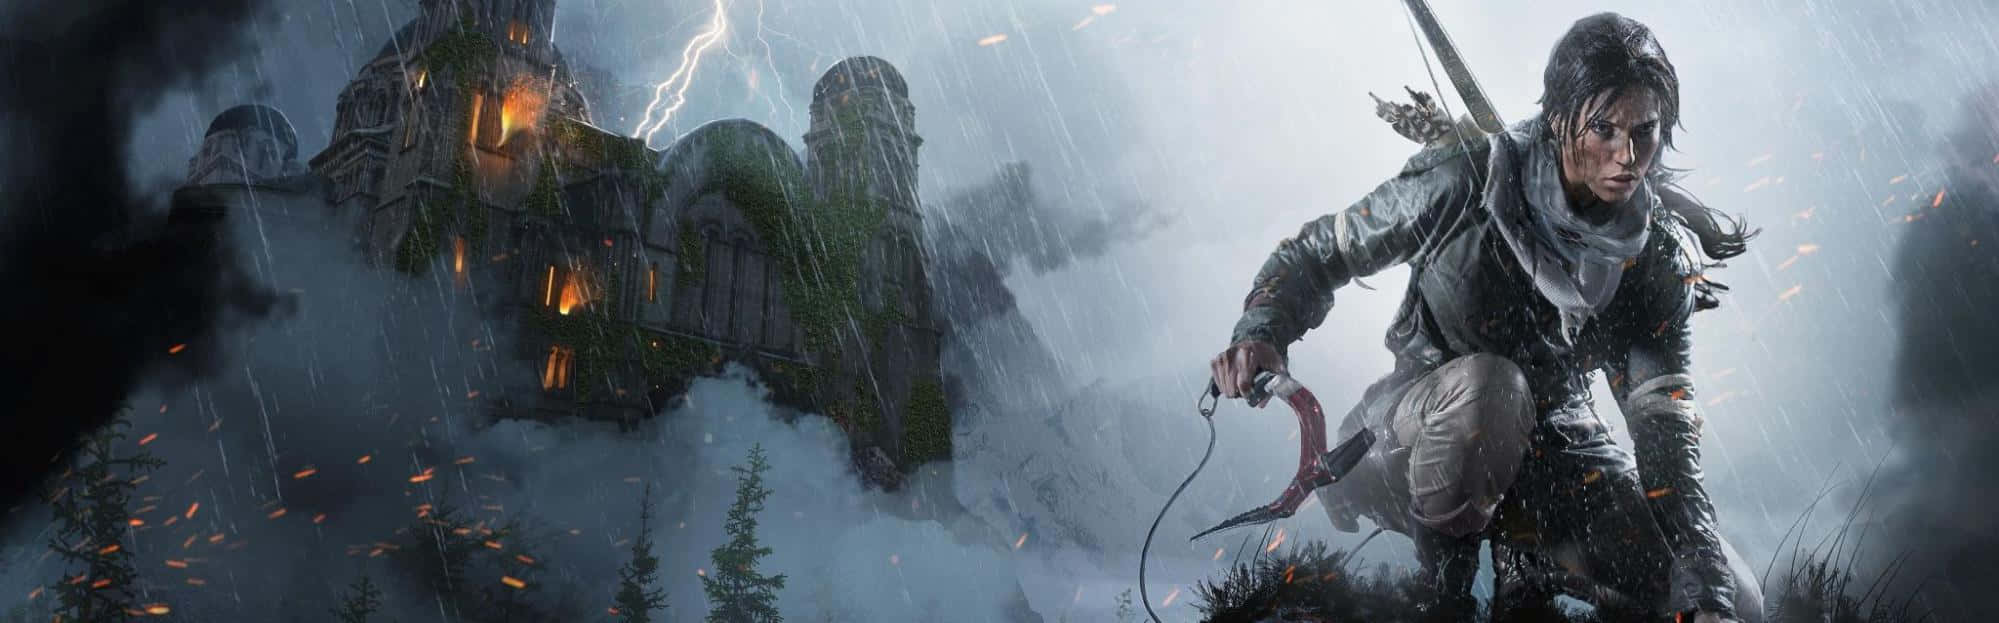 Cryptic Rise Of The Tomb Raider Wallpaper